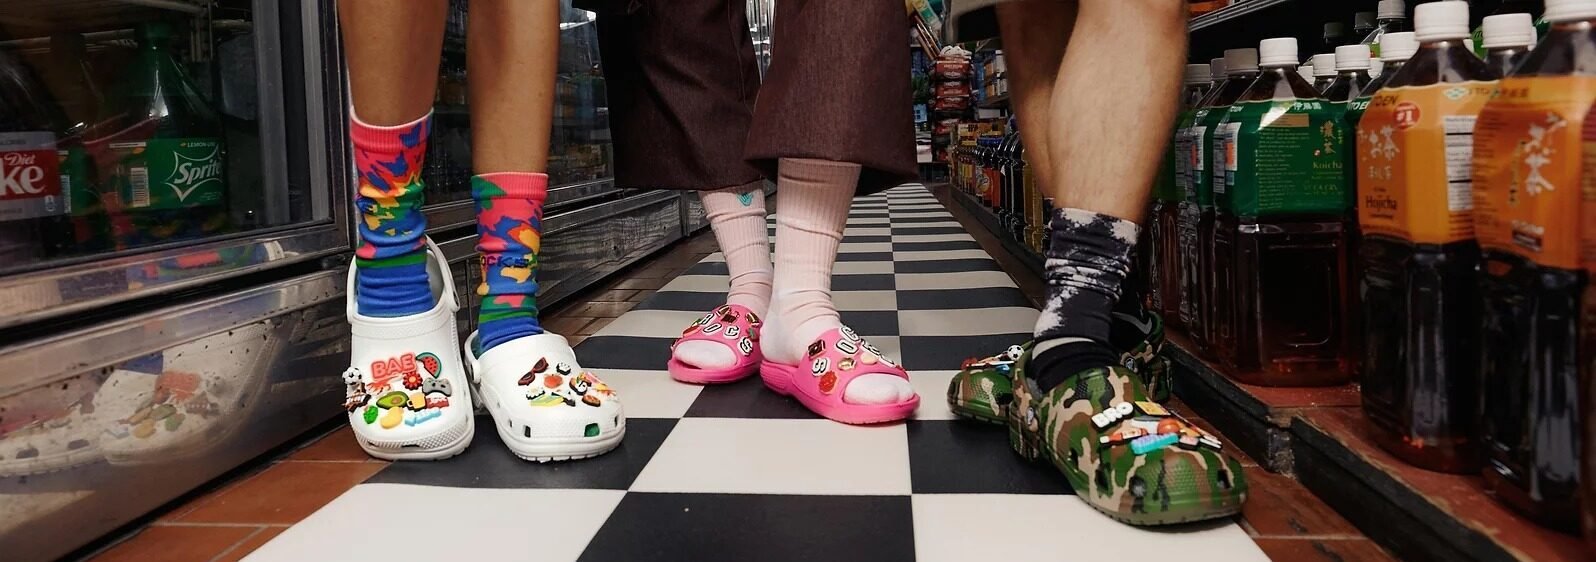 pairs of crocs and socks being modeled in a supermarket